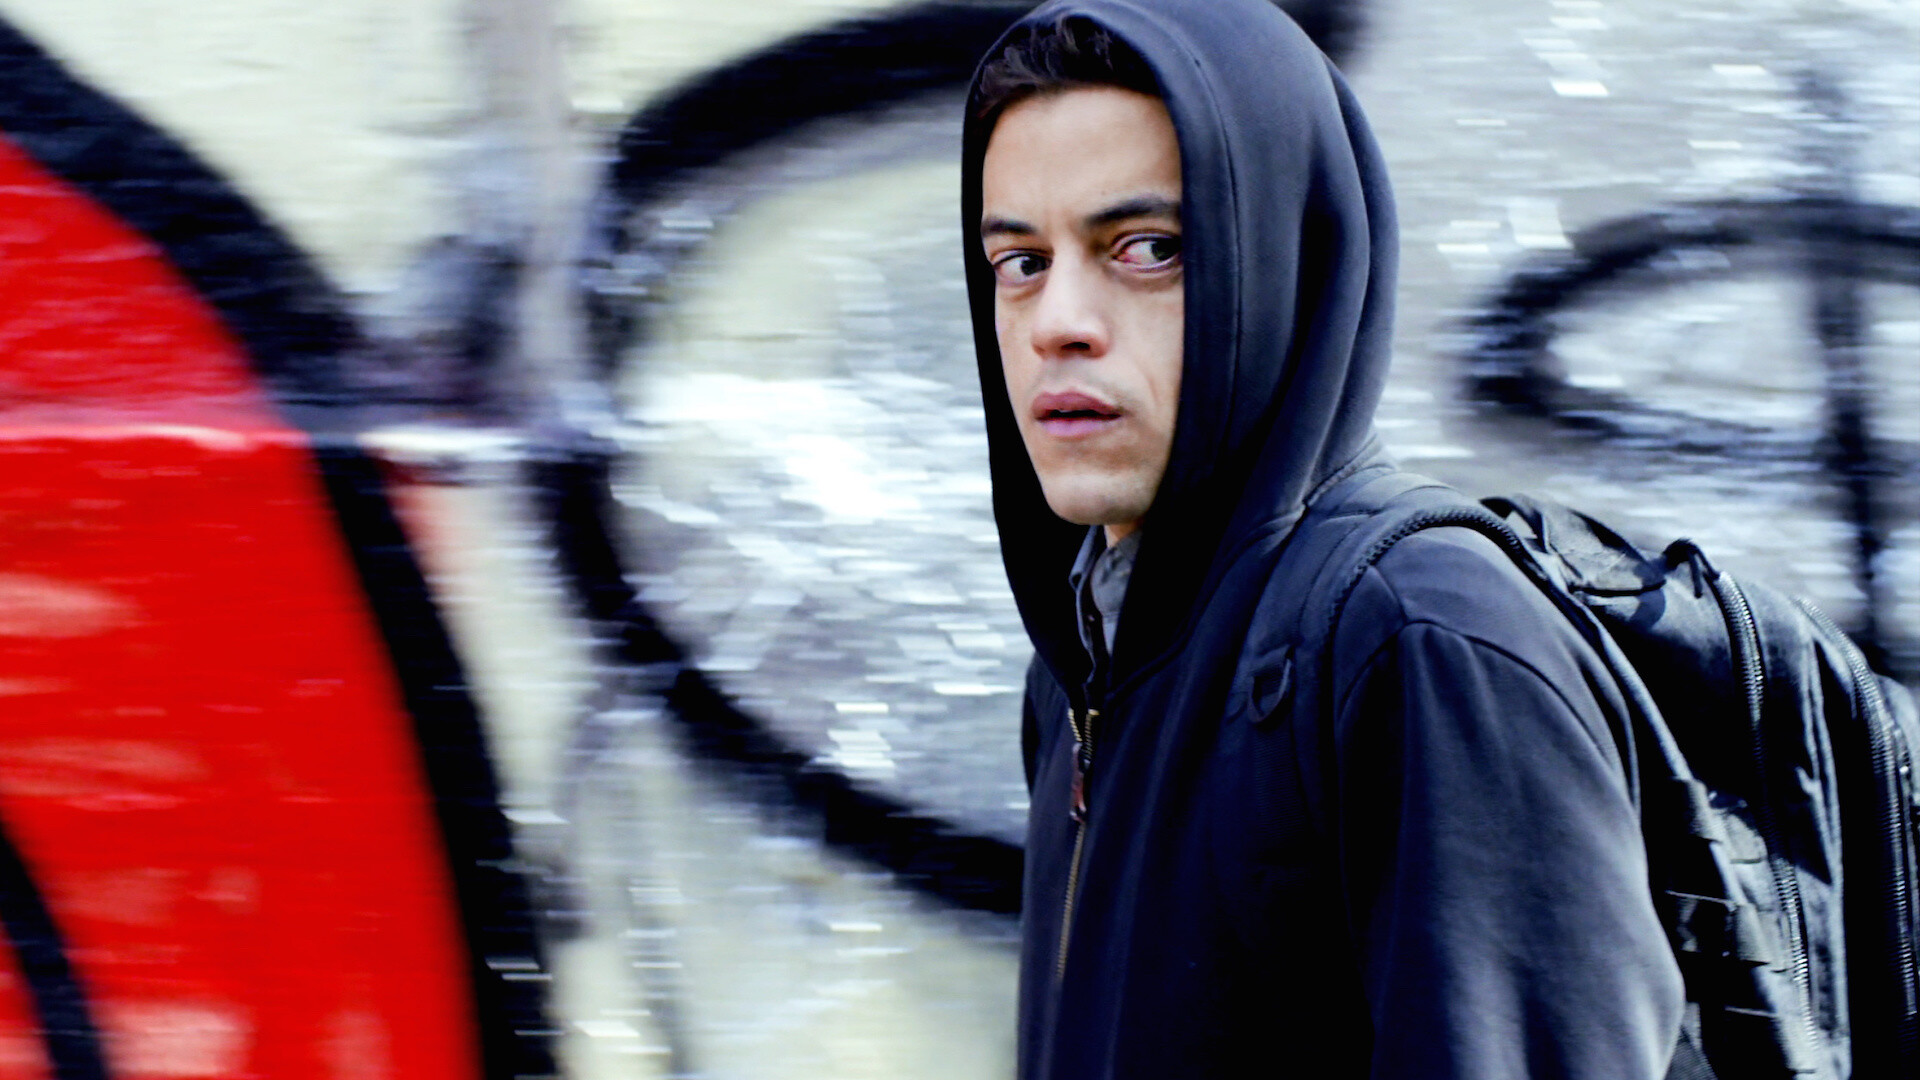 Mr. Robot: The series ran for four seasons and concluded with a two-hour finale on December 22, 2019. 1920x1080 Full HD Wallpaper.